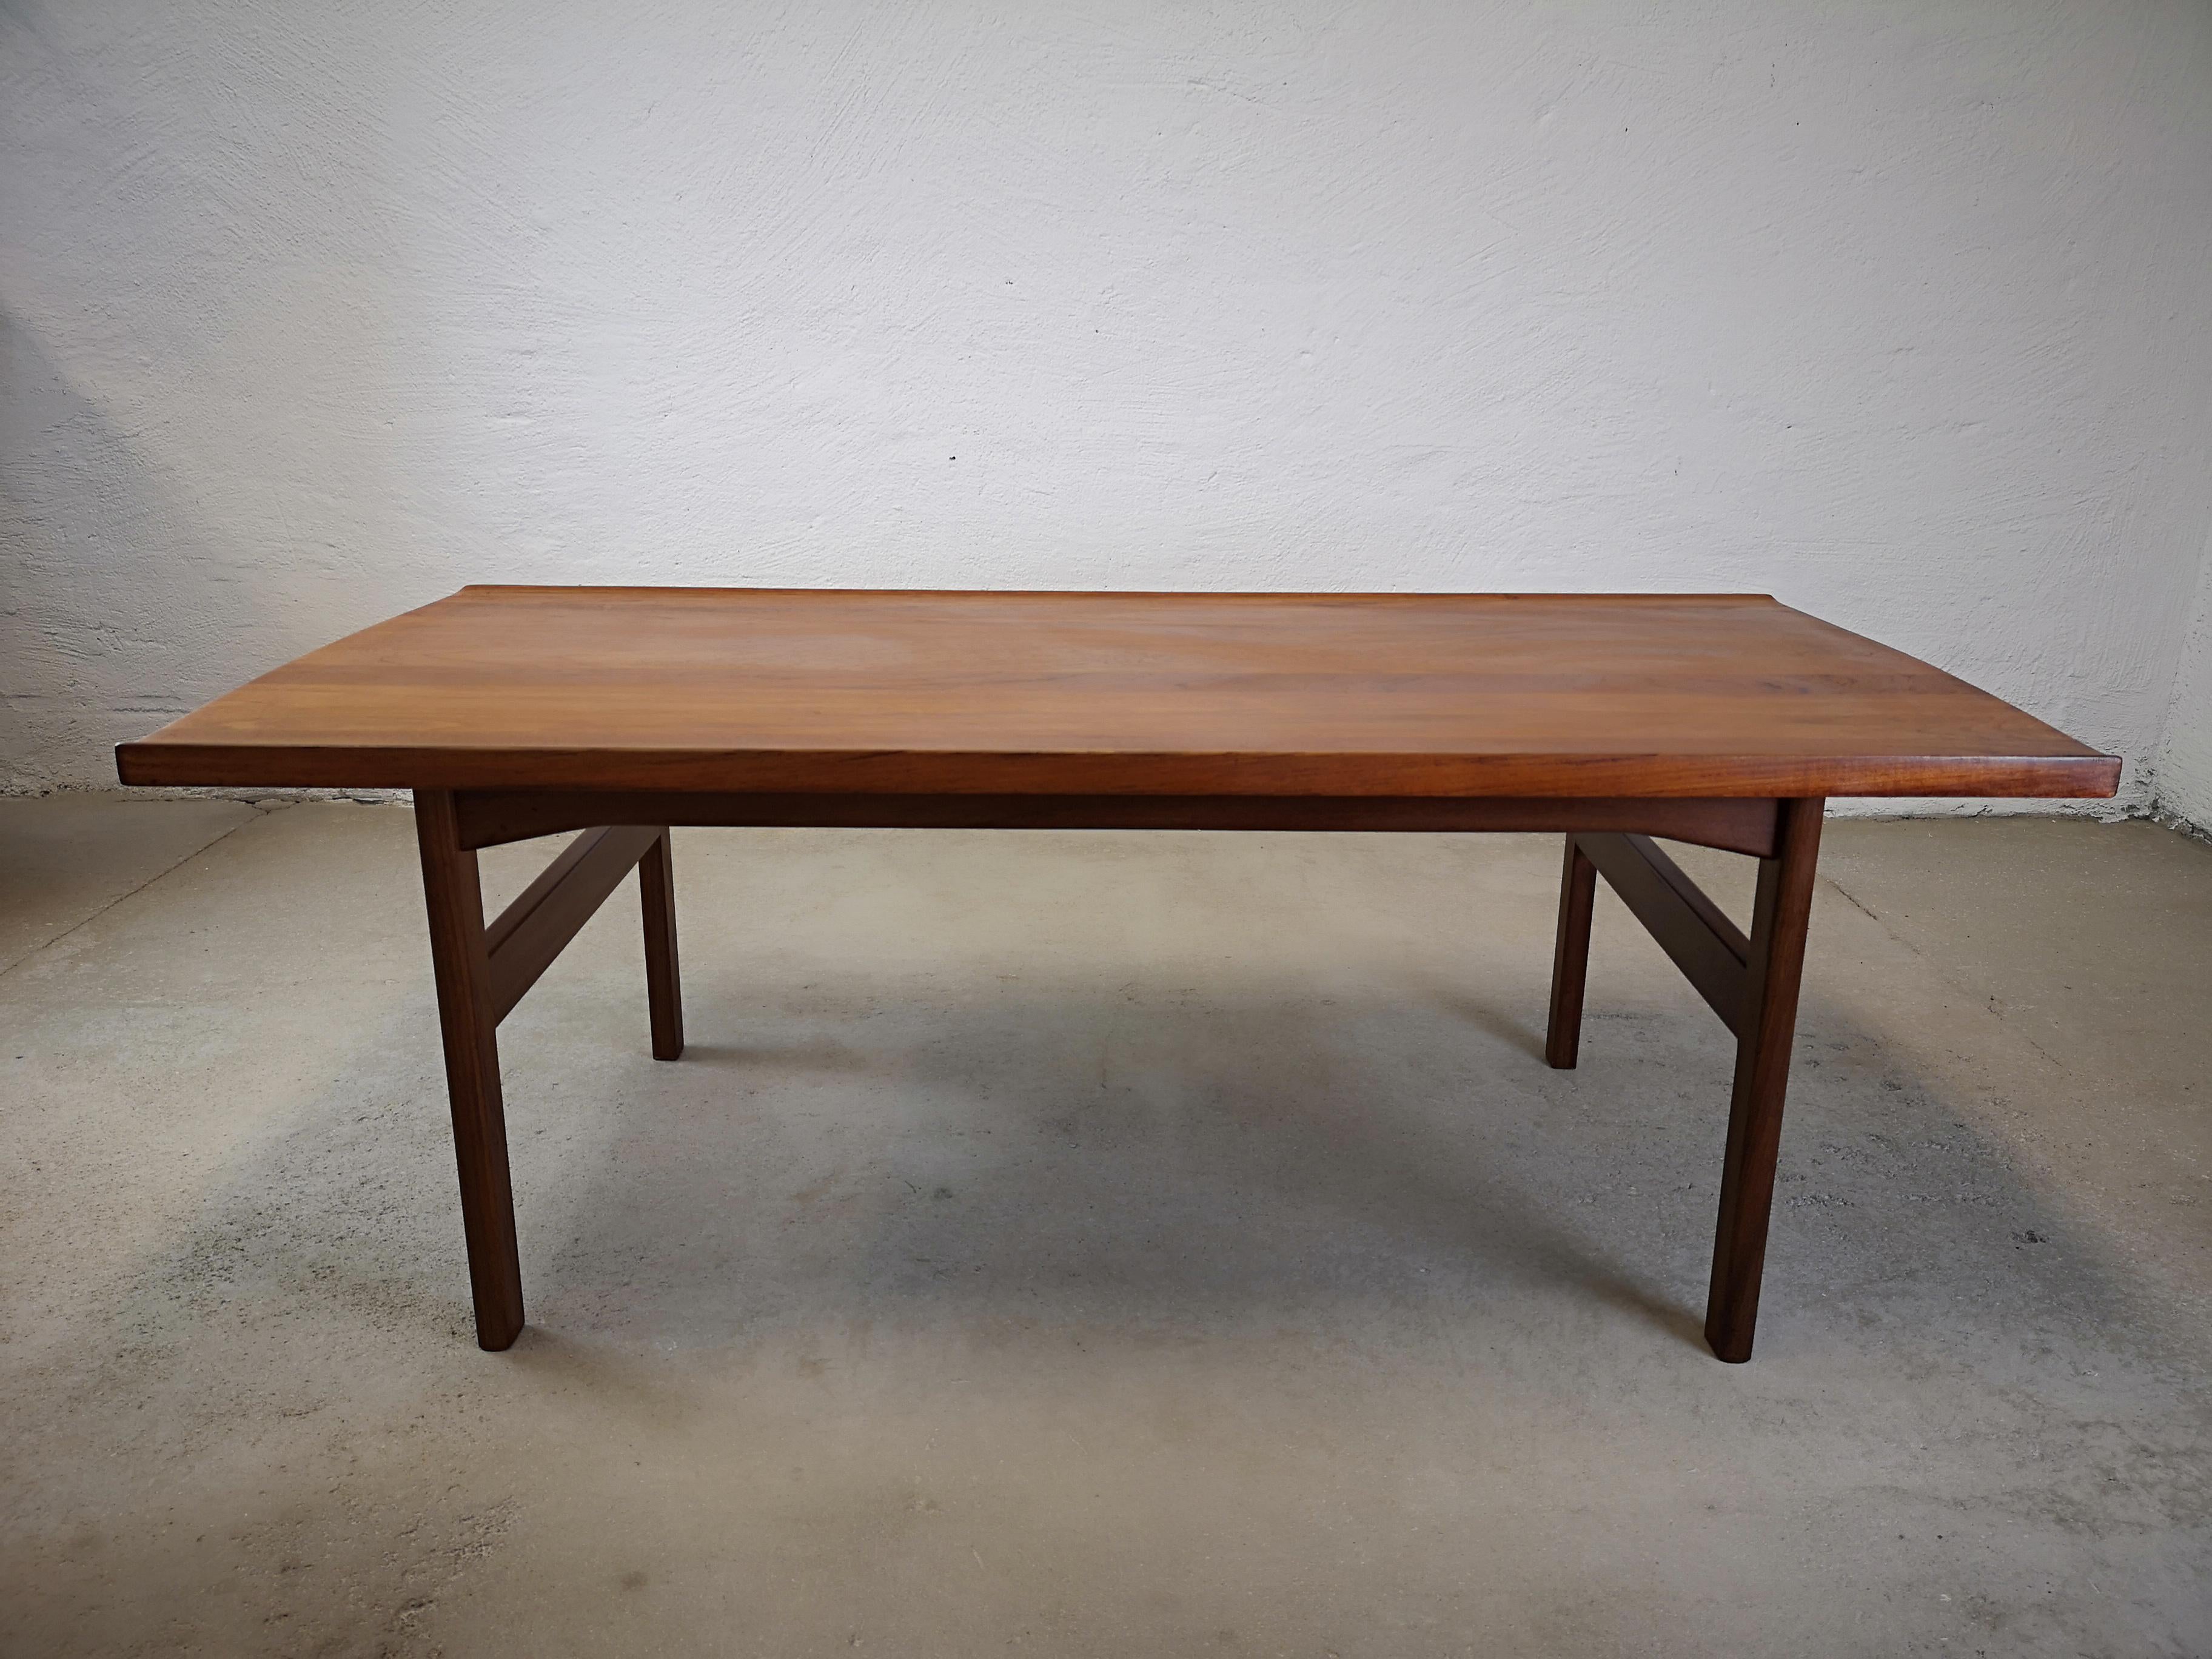 Teak coffee table made in Sweden by Seffle Möbelfabrik. Designed by Tove and Edvard Kindt Larsen. The detailed solid teak table featuring lipped edge top with two elegantly curved sides.
The curved edges have a nice inlay of lighter wood with